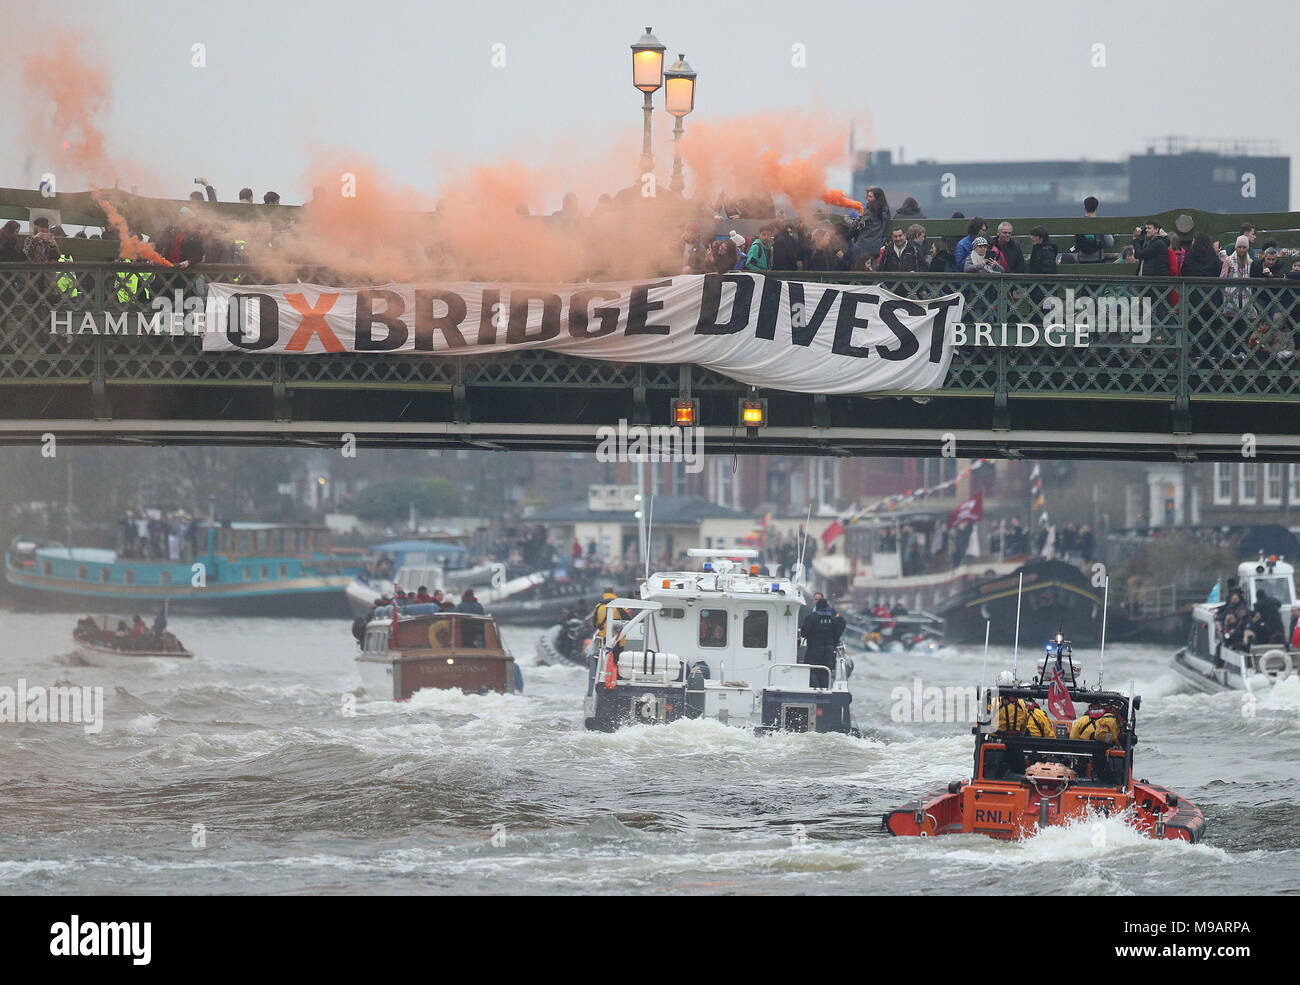 Oxford and Cambridge student environmental activists protest on Hammersmith Bridge in London during the mens Boat Race demanding that 'both universities commit to full divestment from fossil fuels'. Stock Photo